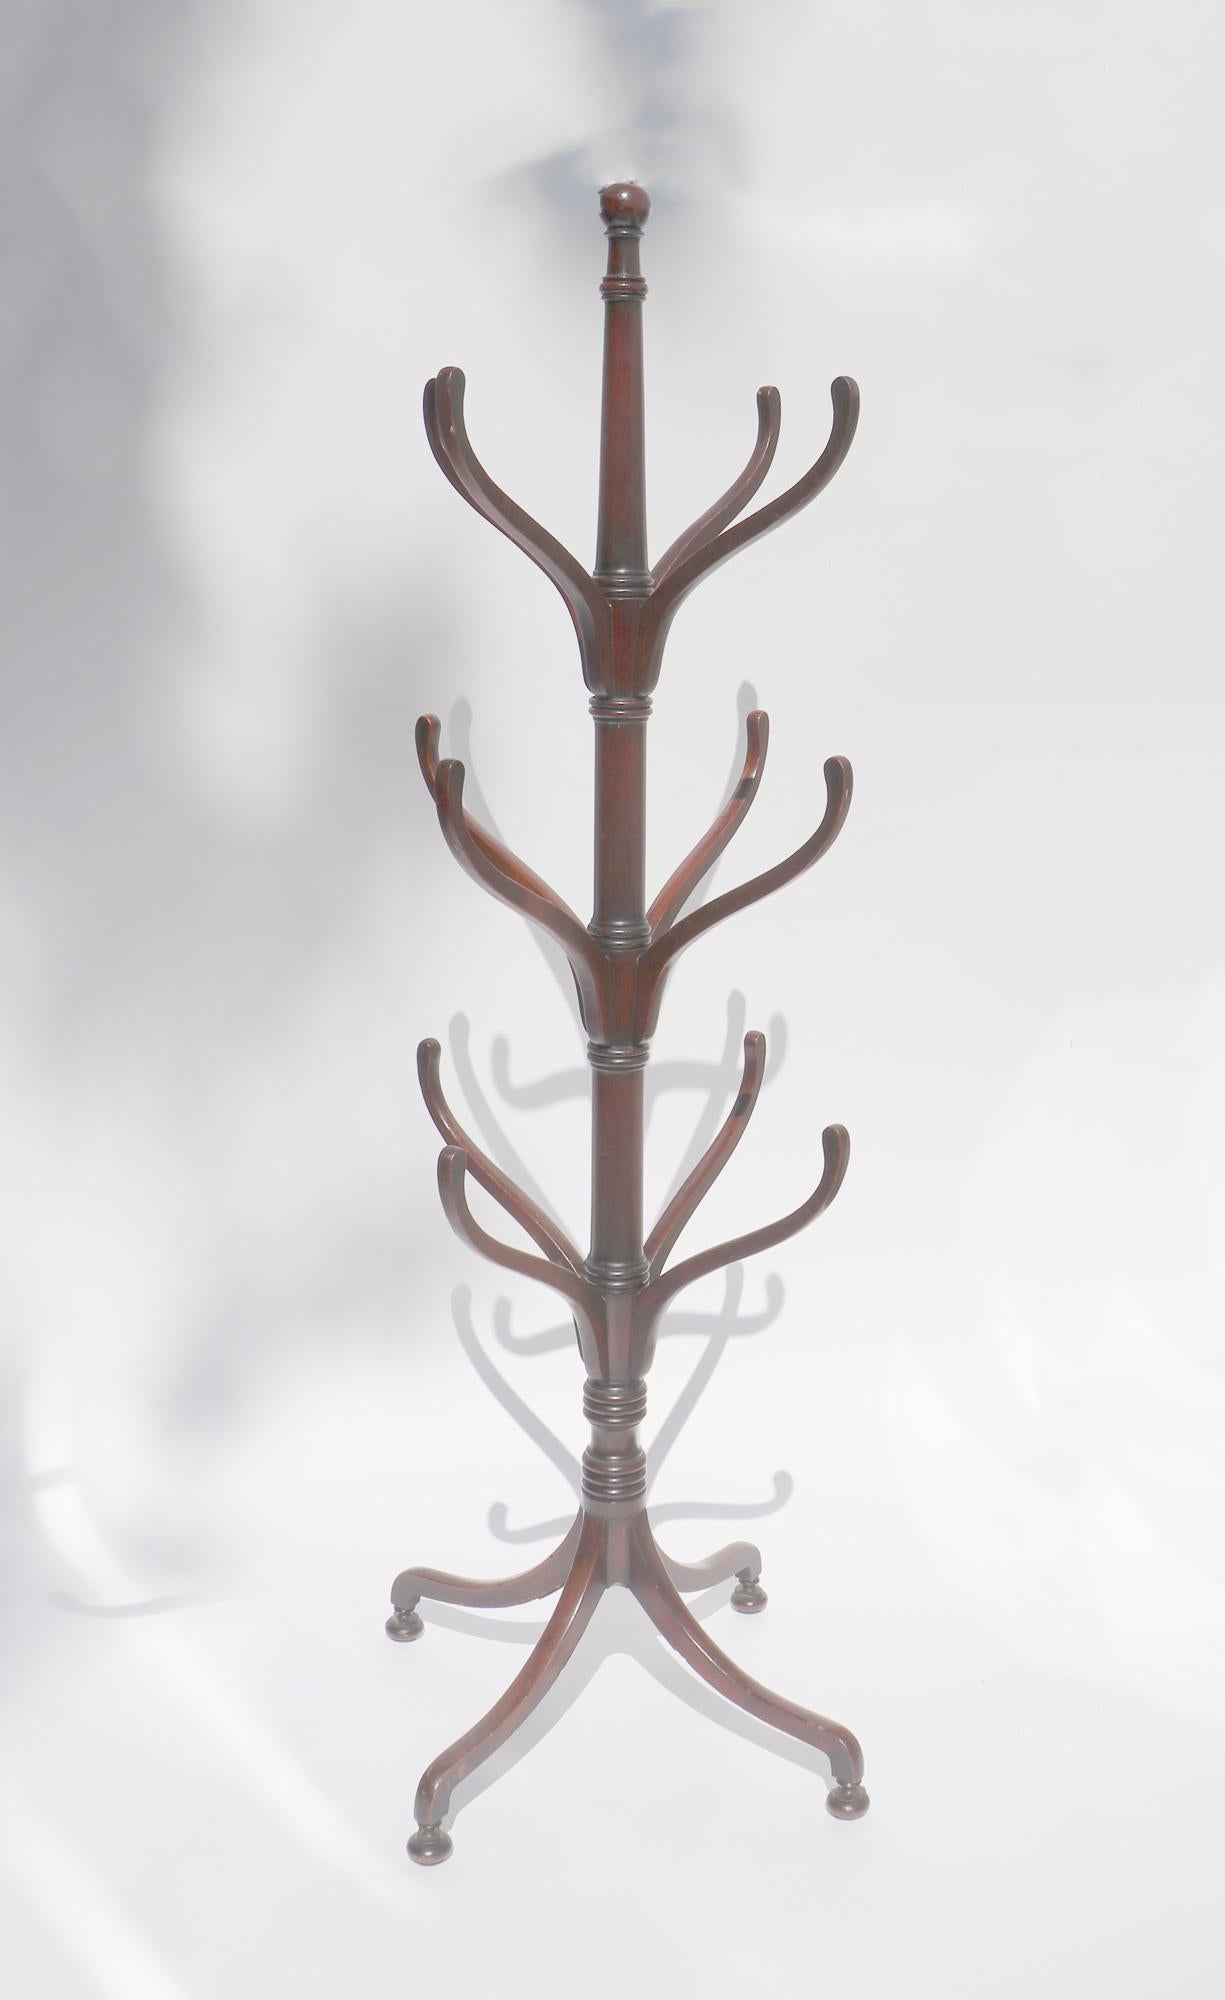 Late Regency Mahogany Hat or Coat Stand,
Circa 1840

The mahogany hat stand has three series of four hangers of reducing sizes.  The stand sits of four elegant splayed legs with small bun feet.

Dimensions:  70 3/4 inches high x 28 inches wide at